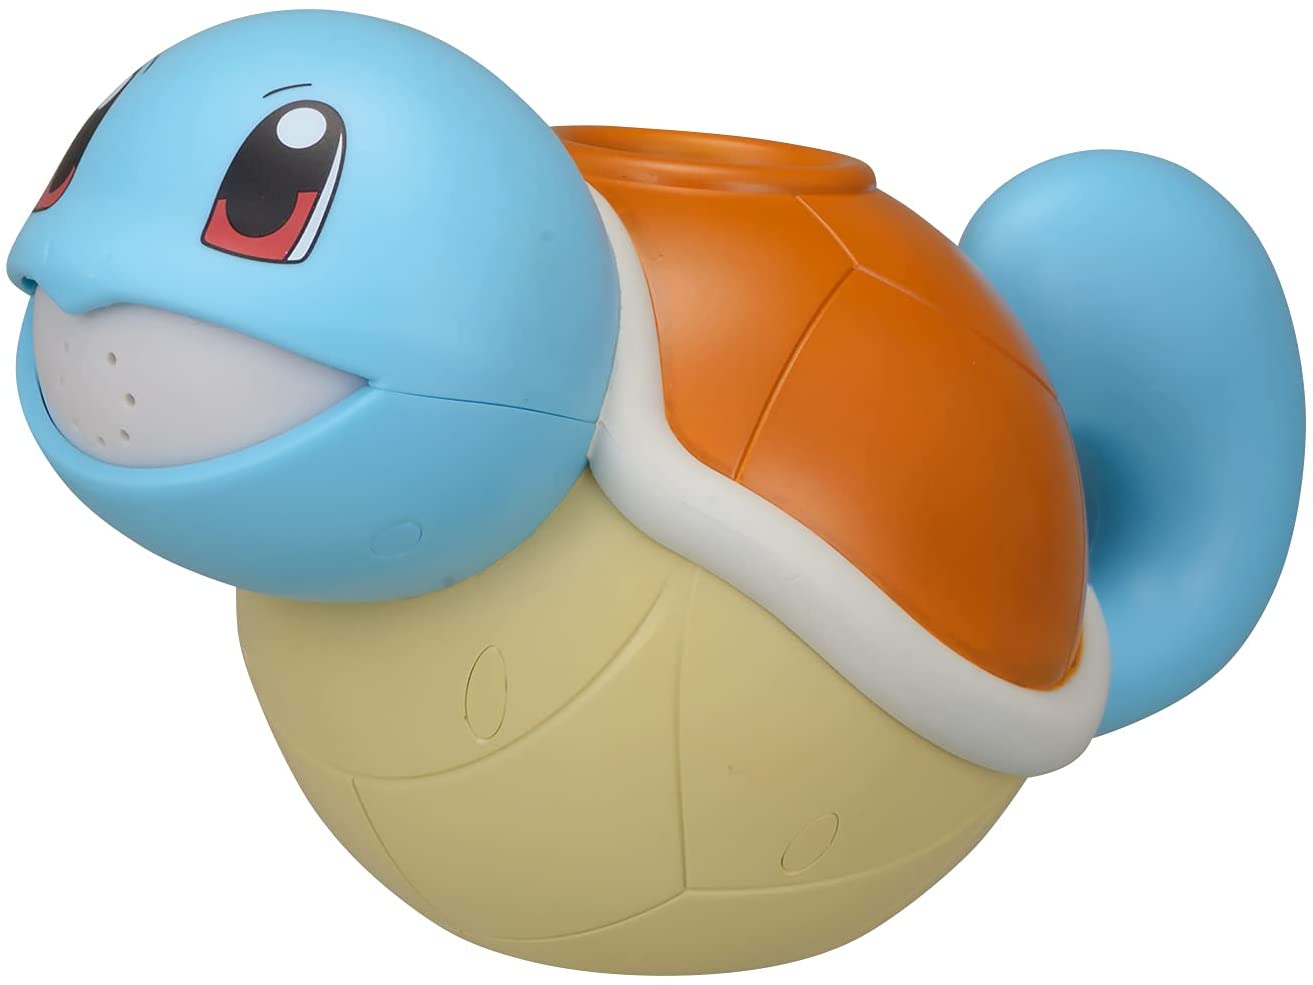 Pokemon - Squirtle Watering Can (Pokemon Center) - Brand New